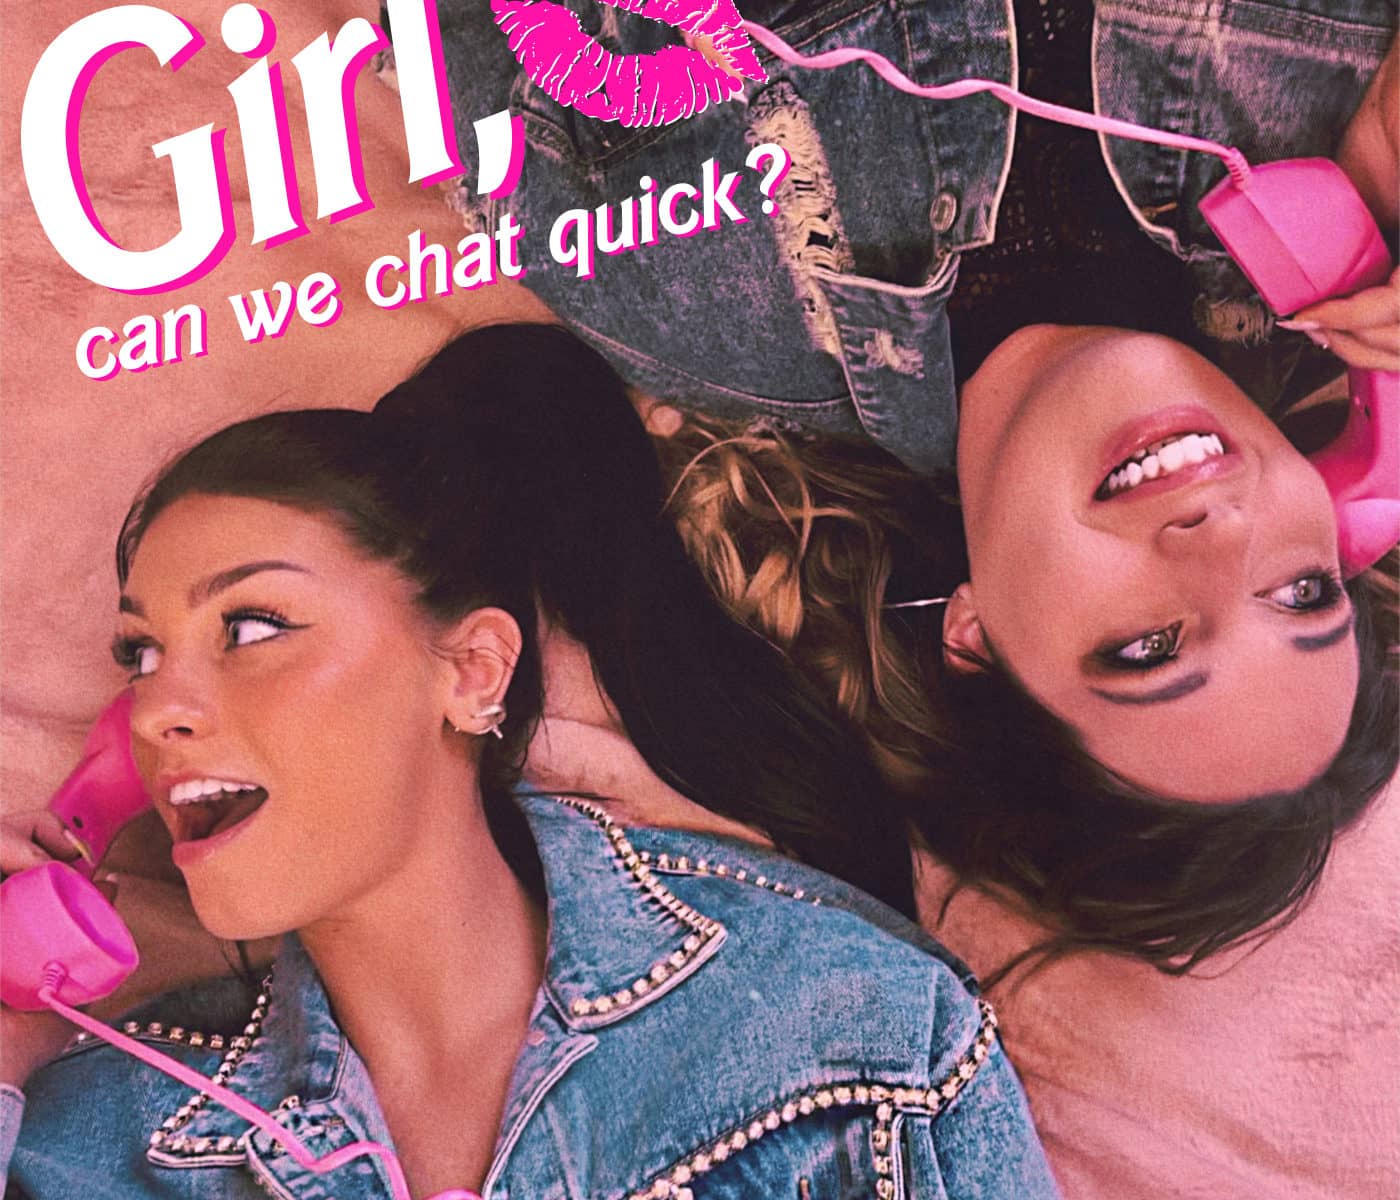 girl_can_we_chat_quick_podcast-23